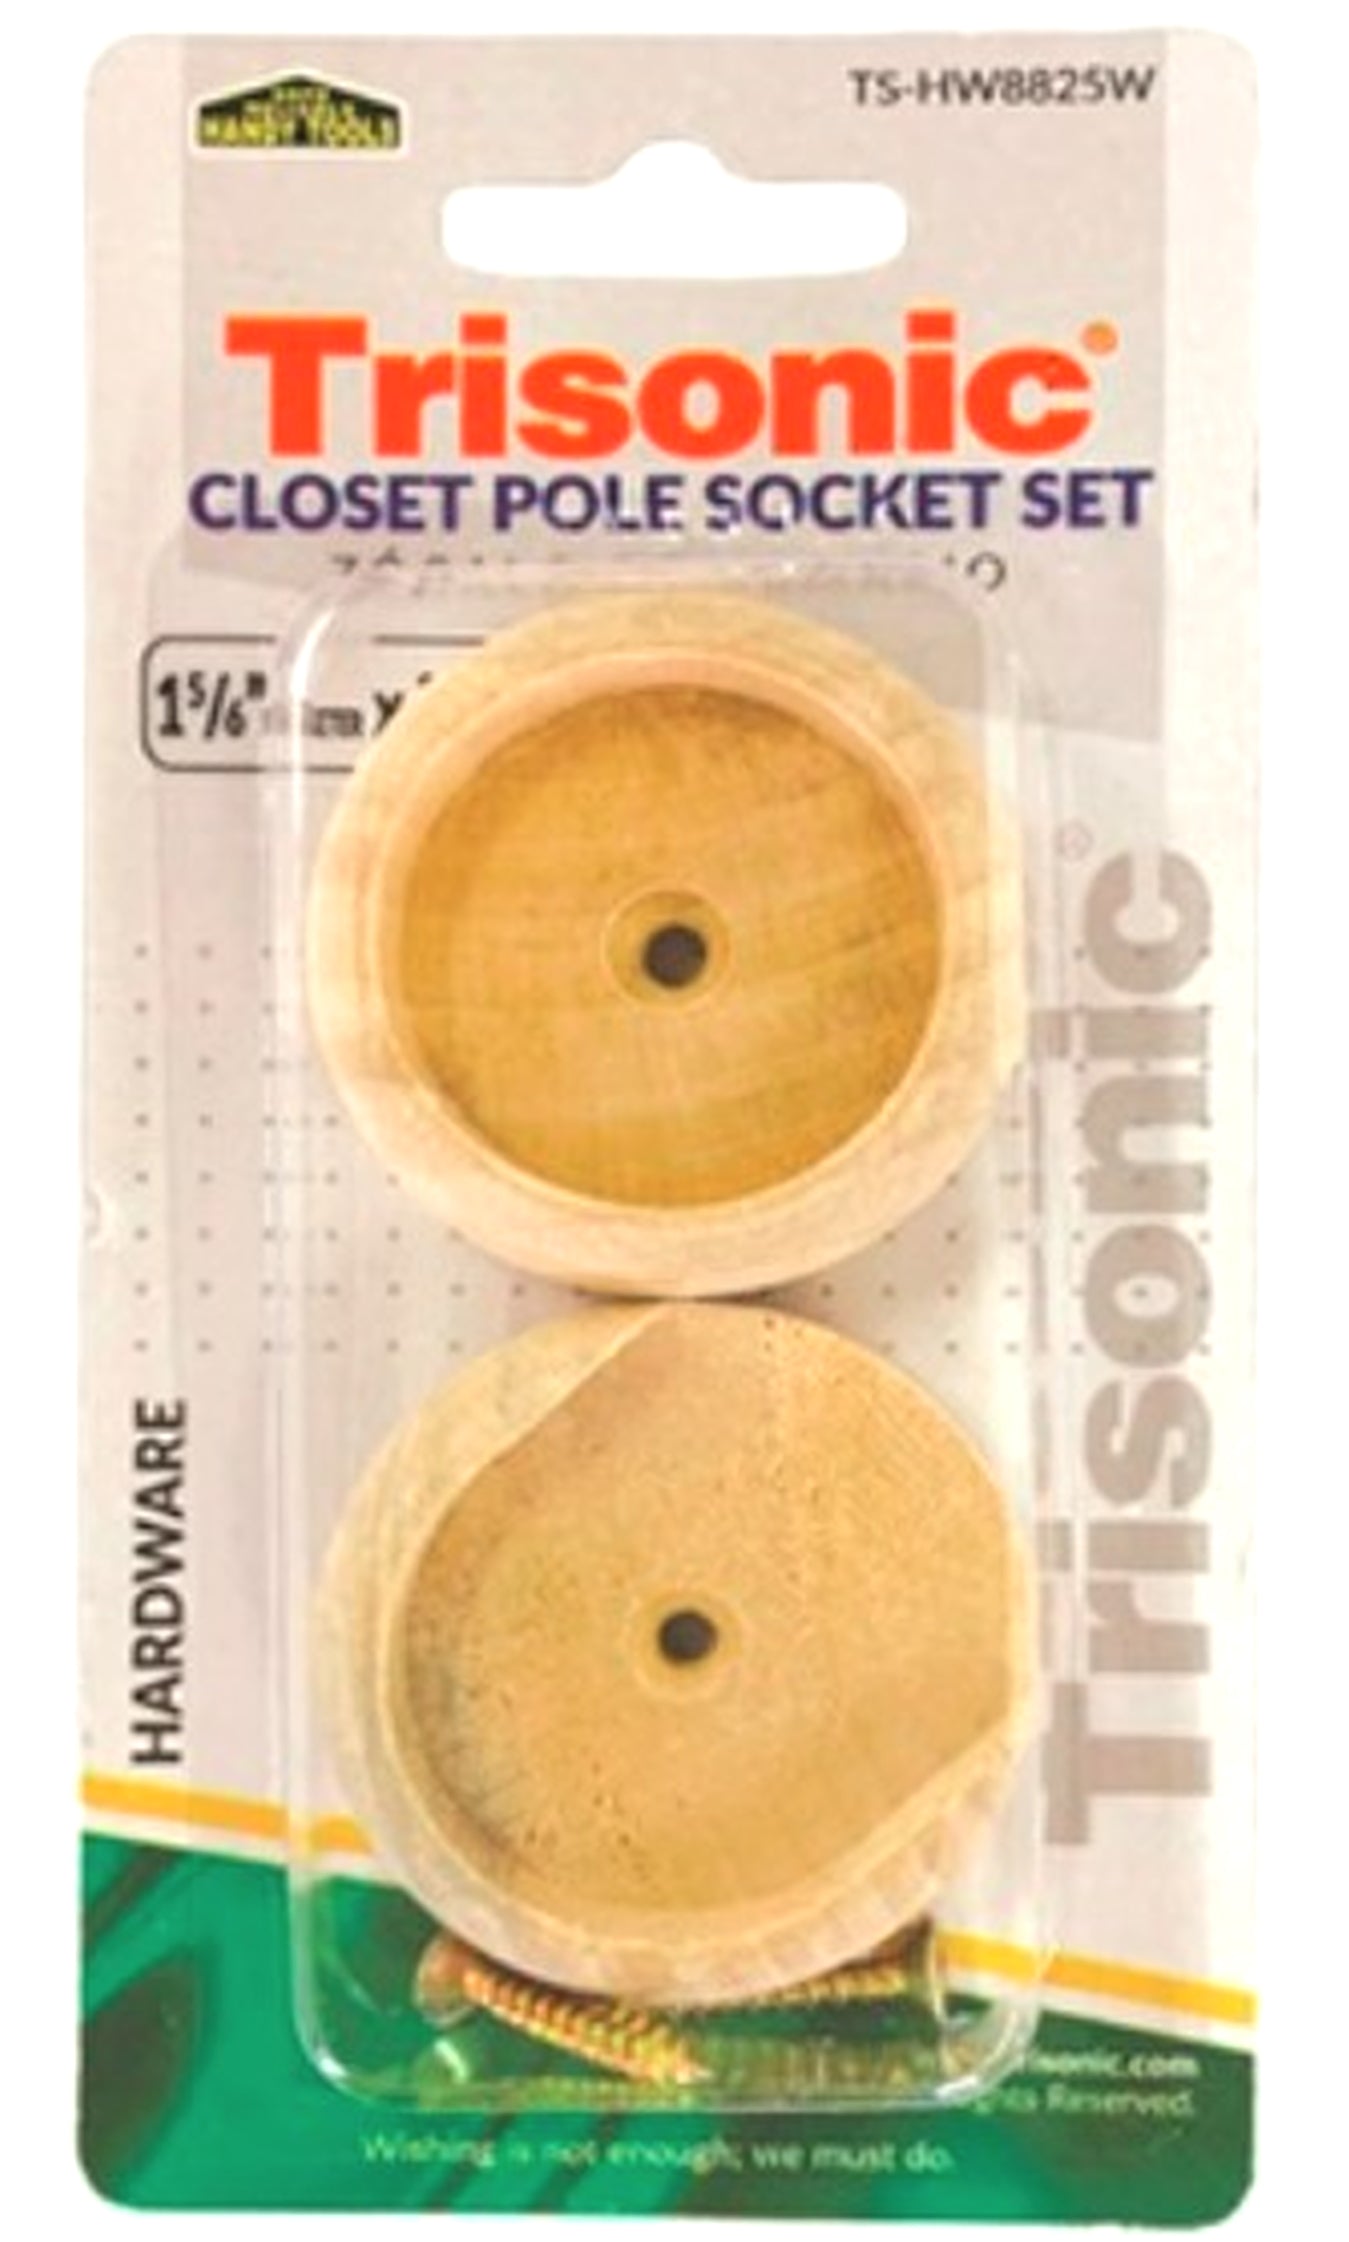 Complete Set Wooden Closet Pole Sockets with Screws - Closet Pole Rod Holders 1 5/6" diameter x 2/3" thickfits